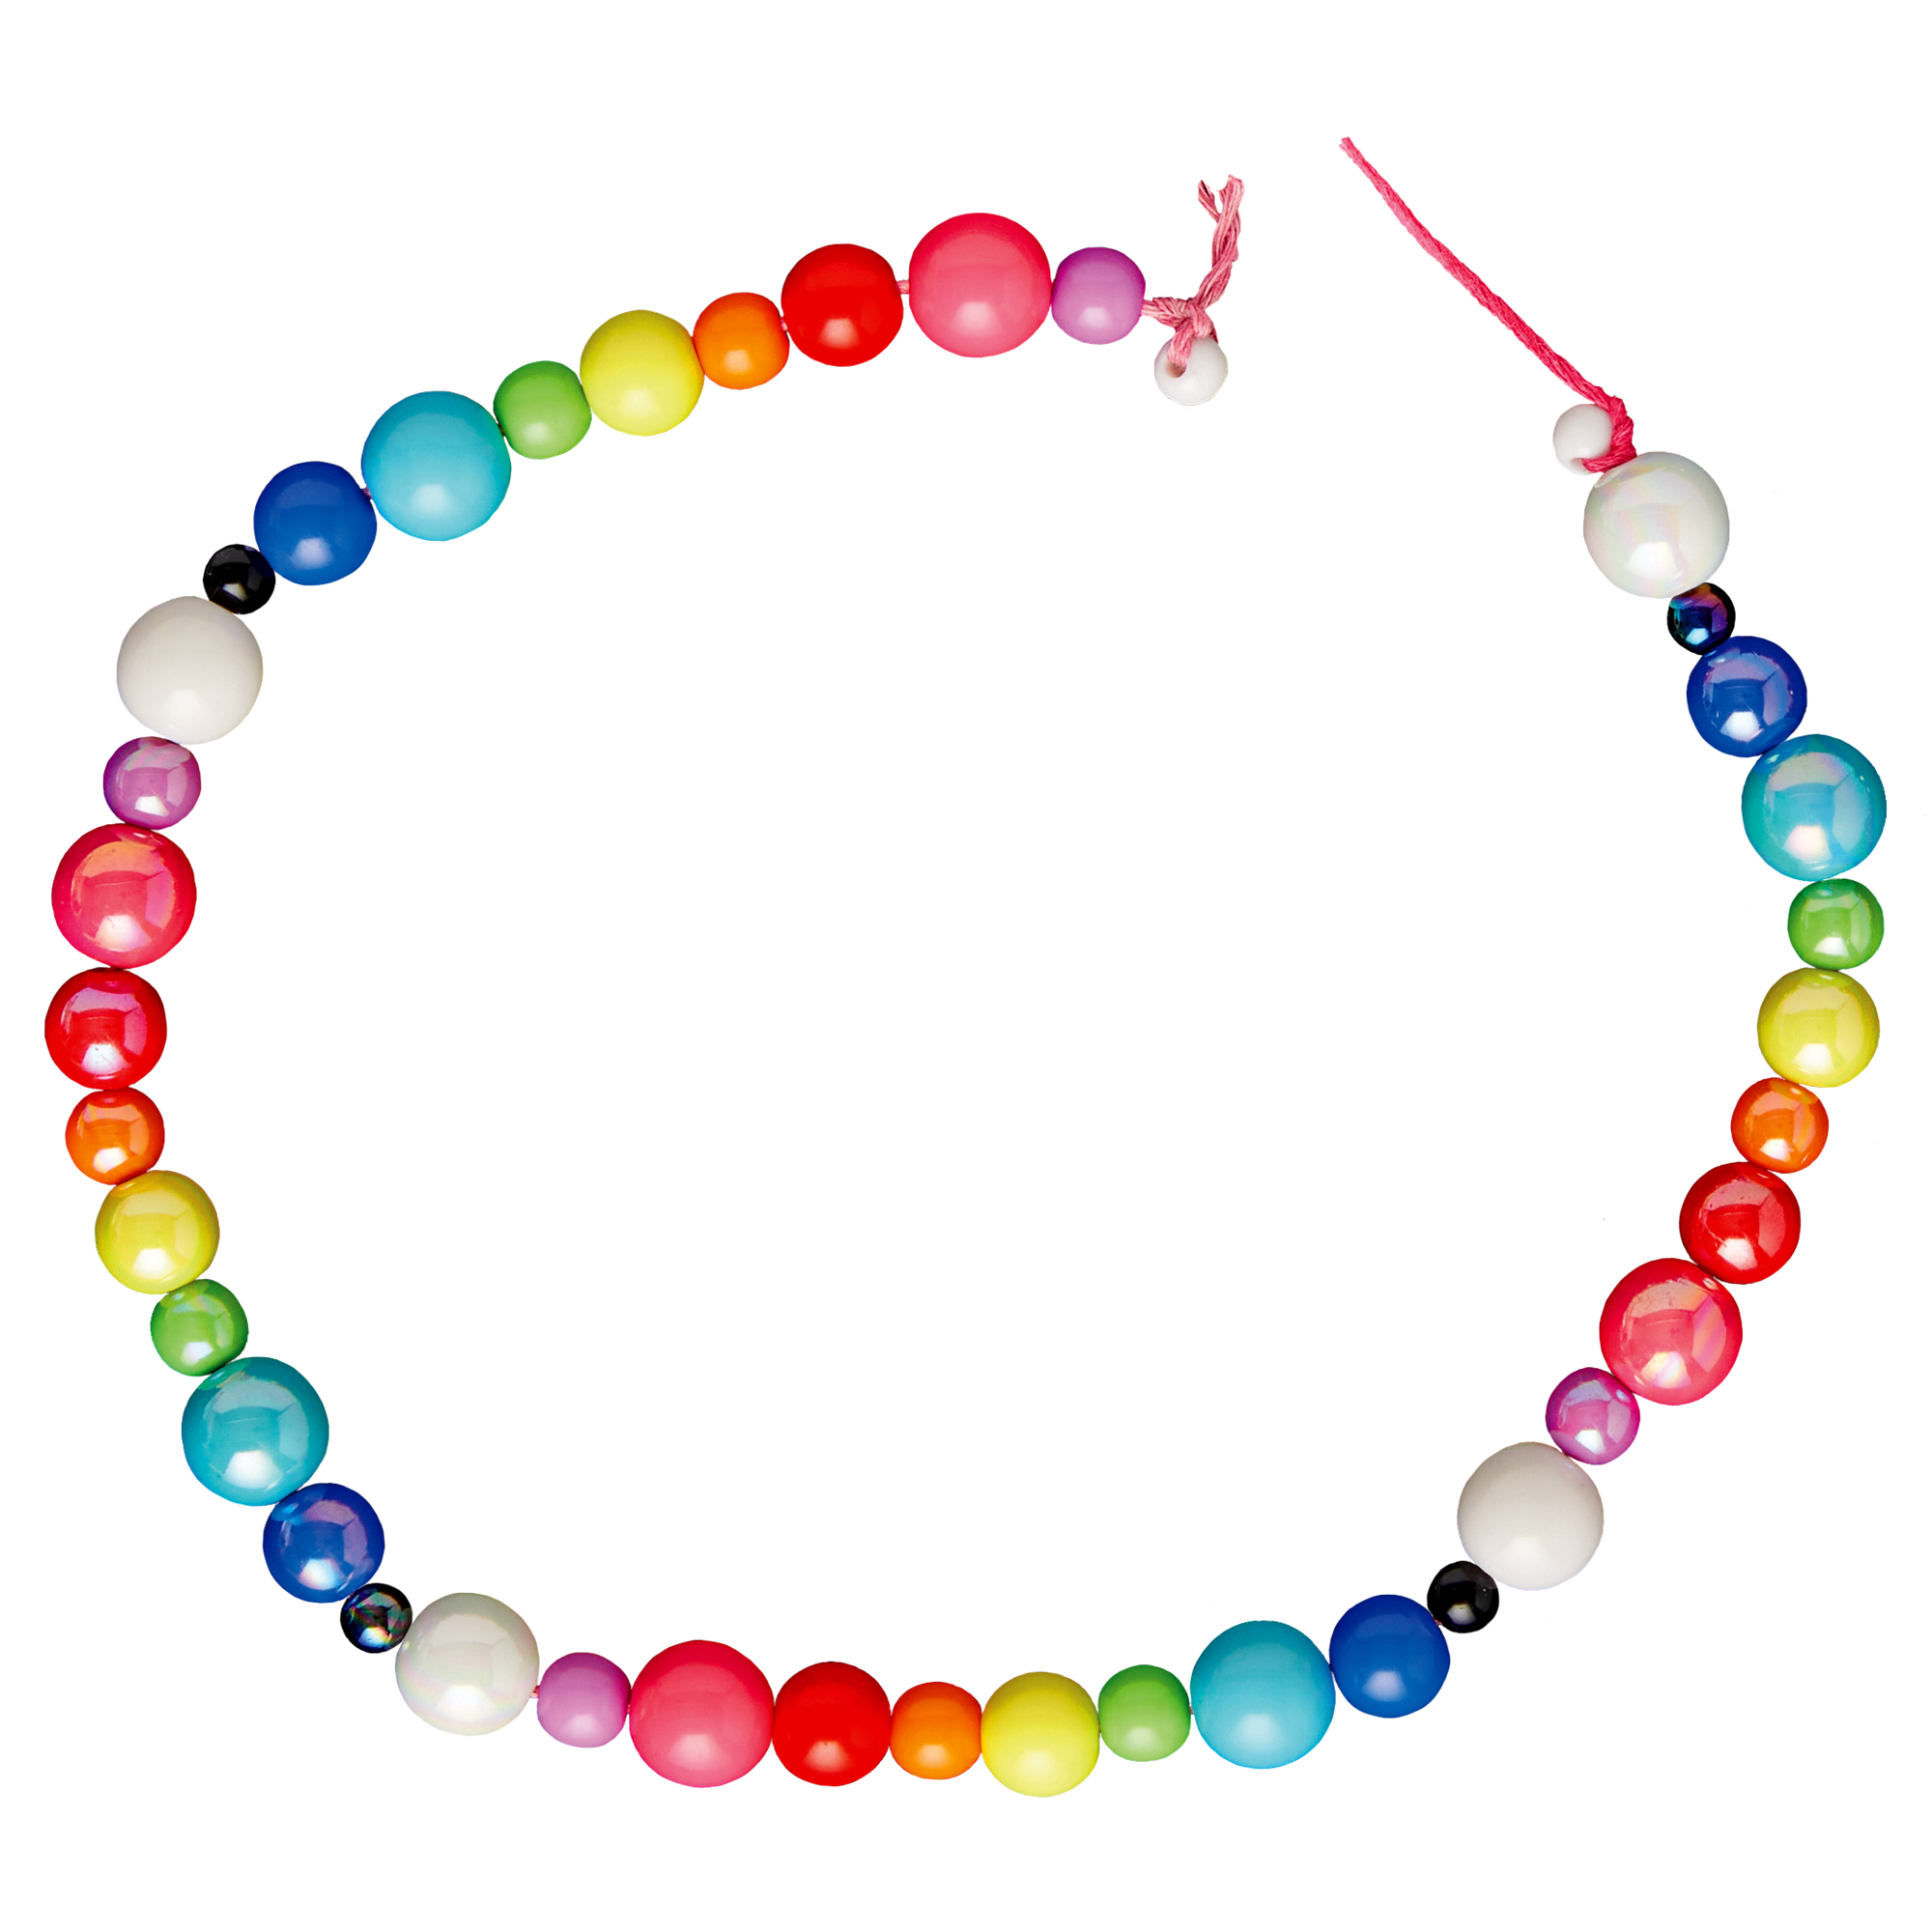 Smarts & Crafts Rainbow Beads, 200 Pieces, Size: 5.00 inchLarge x 5.00 inchw x 0.50 inchd, Multicolor